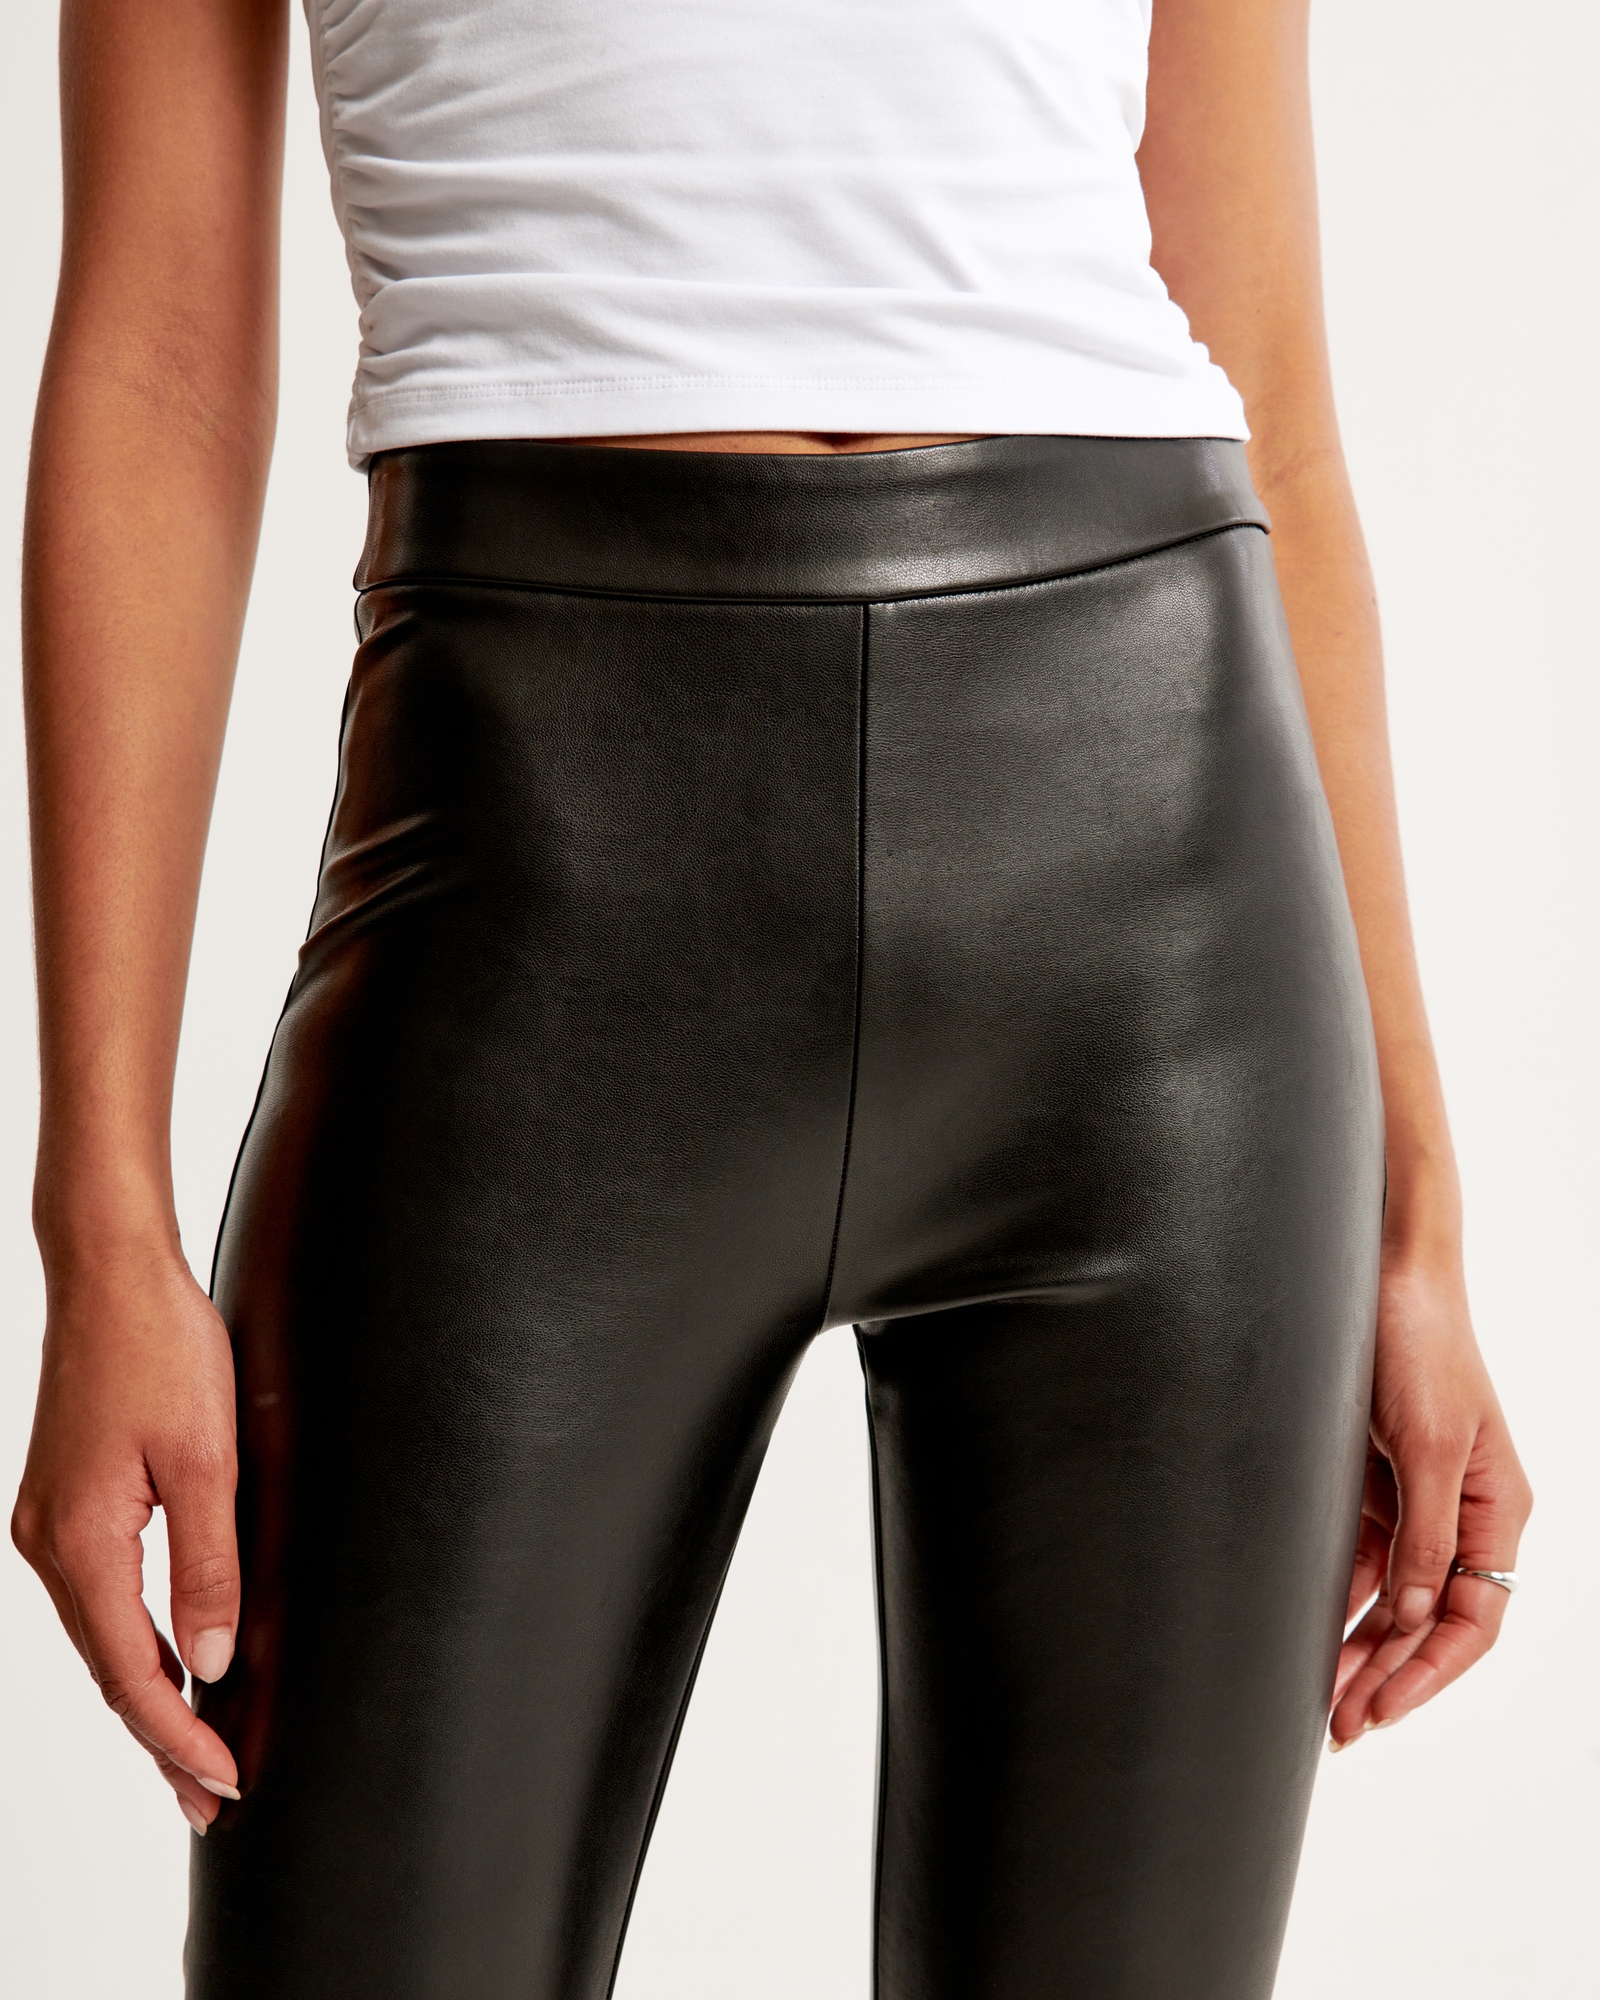 Women's Classic Side Sequined Synthetic Leather Leggings